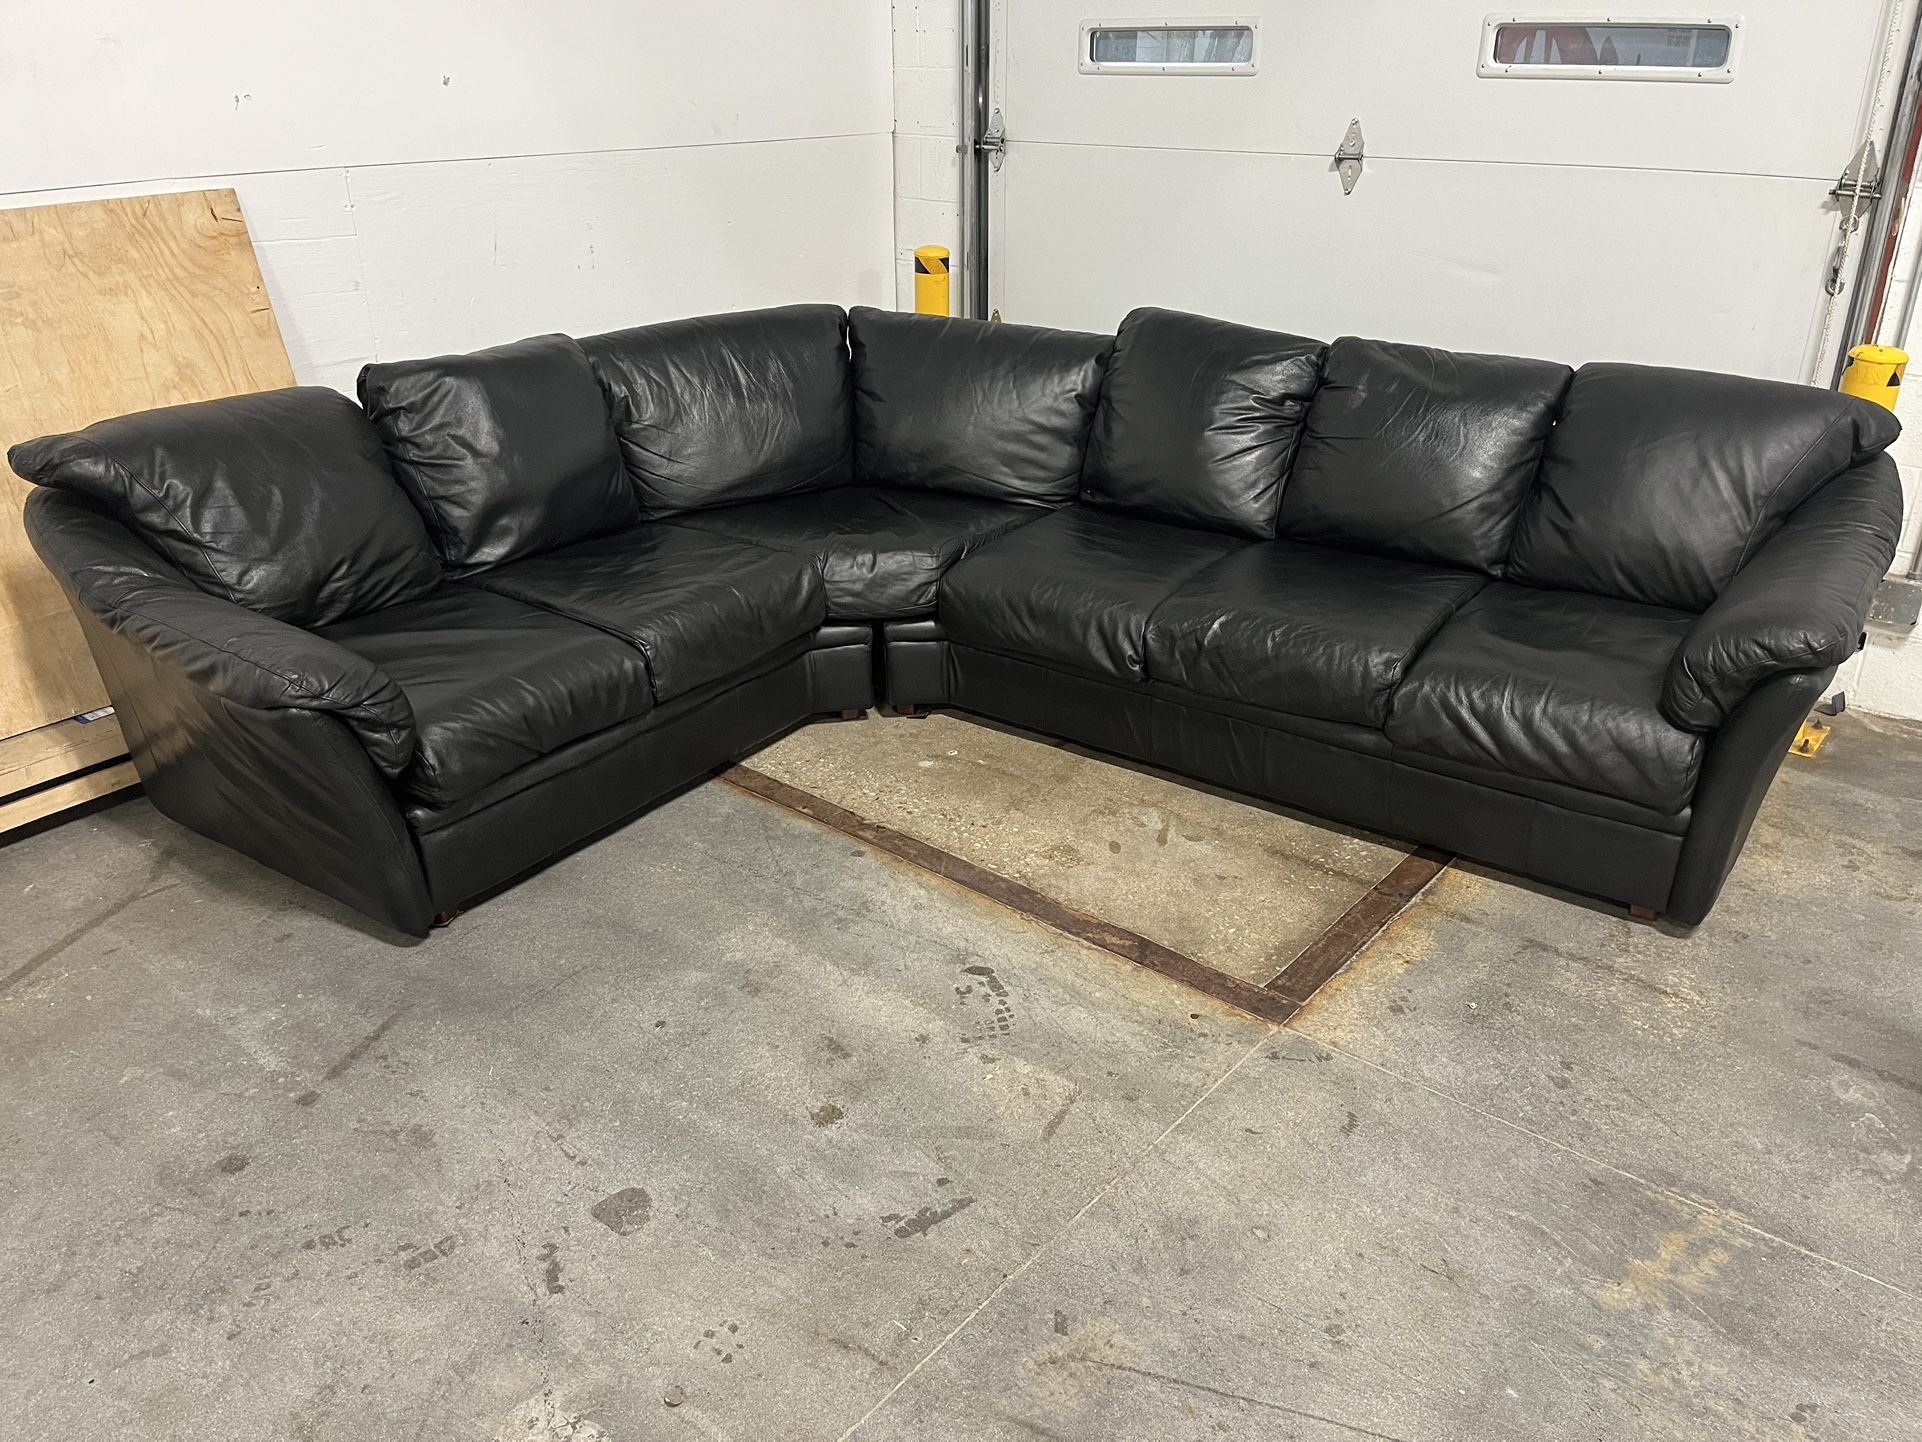 Large Black Leather Sectional Sofa Couch - Rounded Back - Comfy - Clean - Delivery Available 